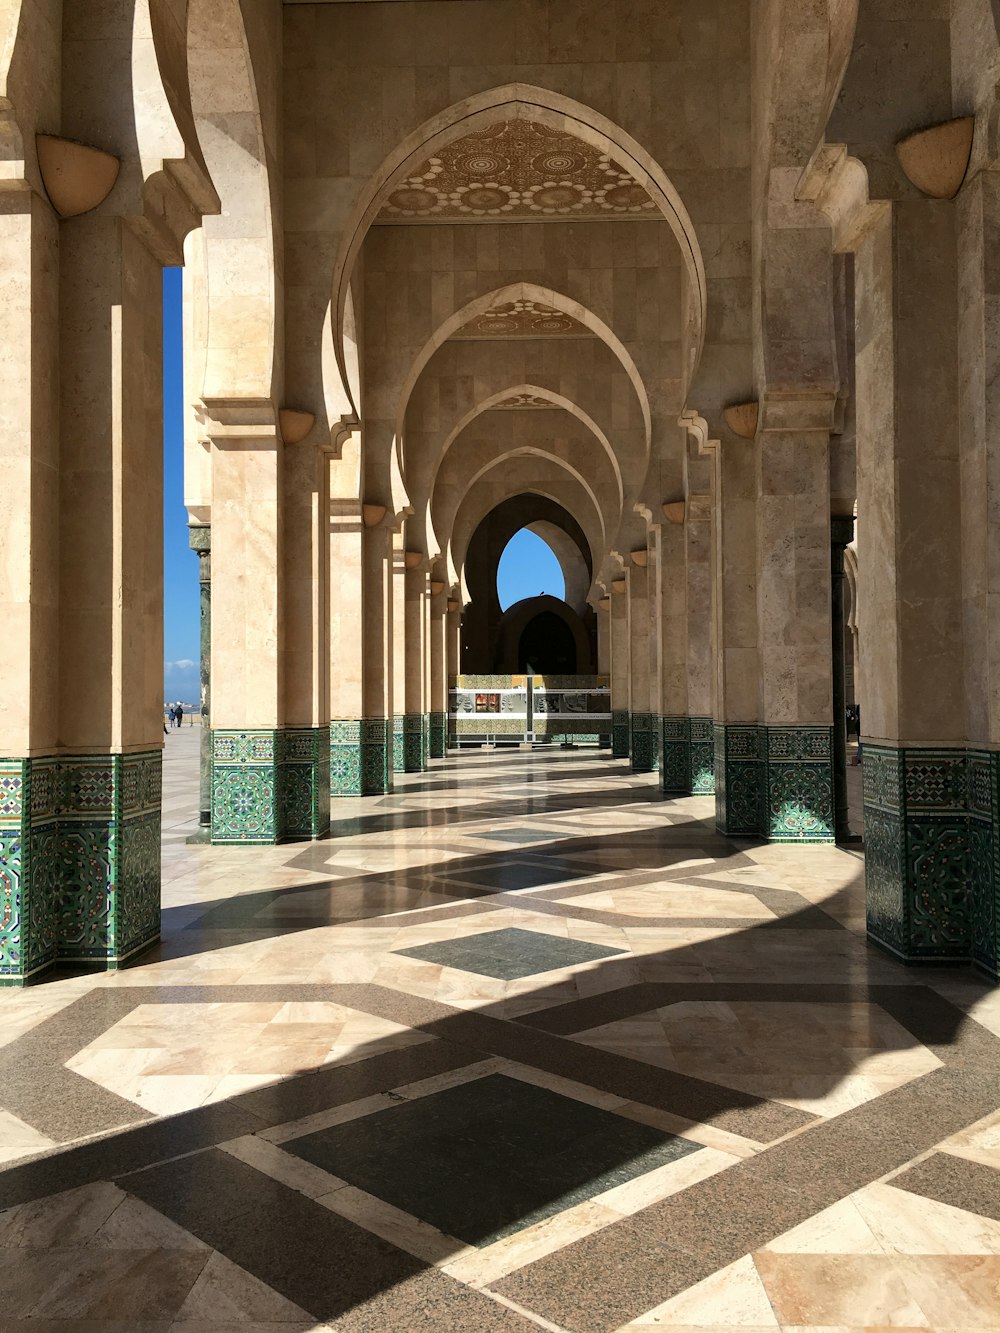 a long hallway with arches and tiled floors